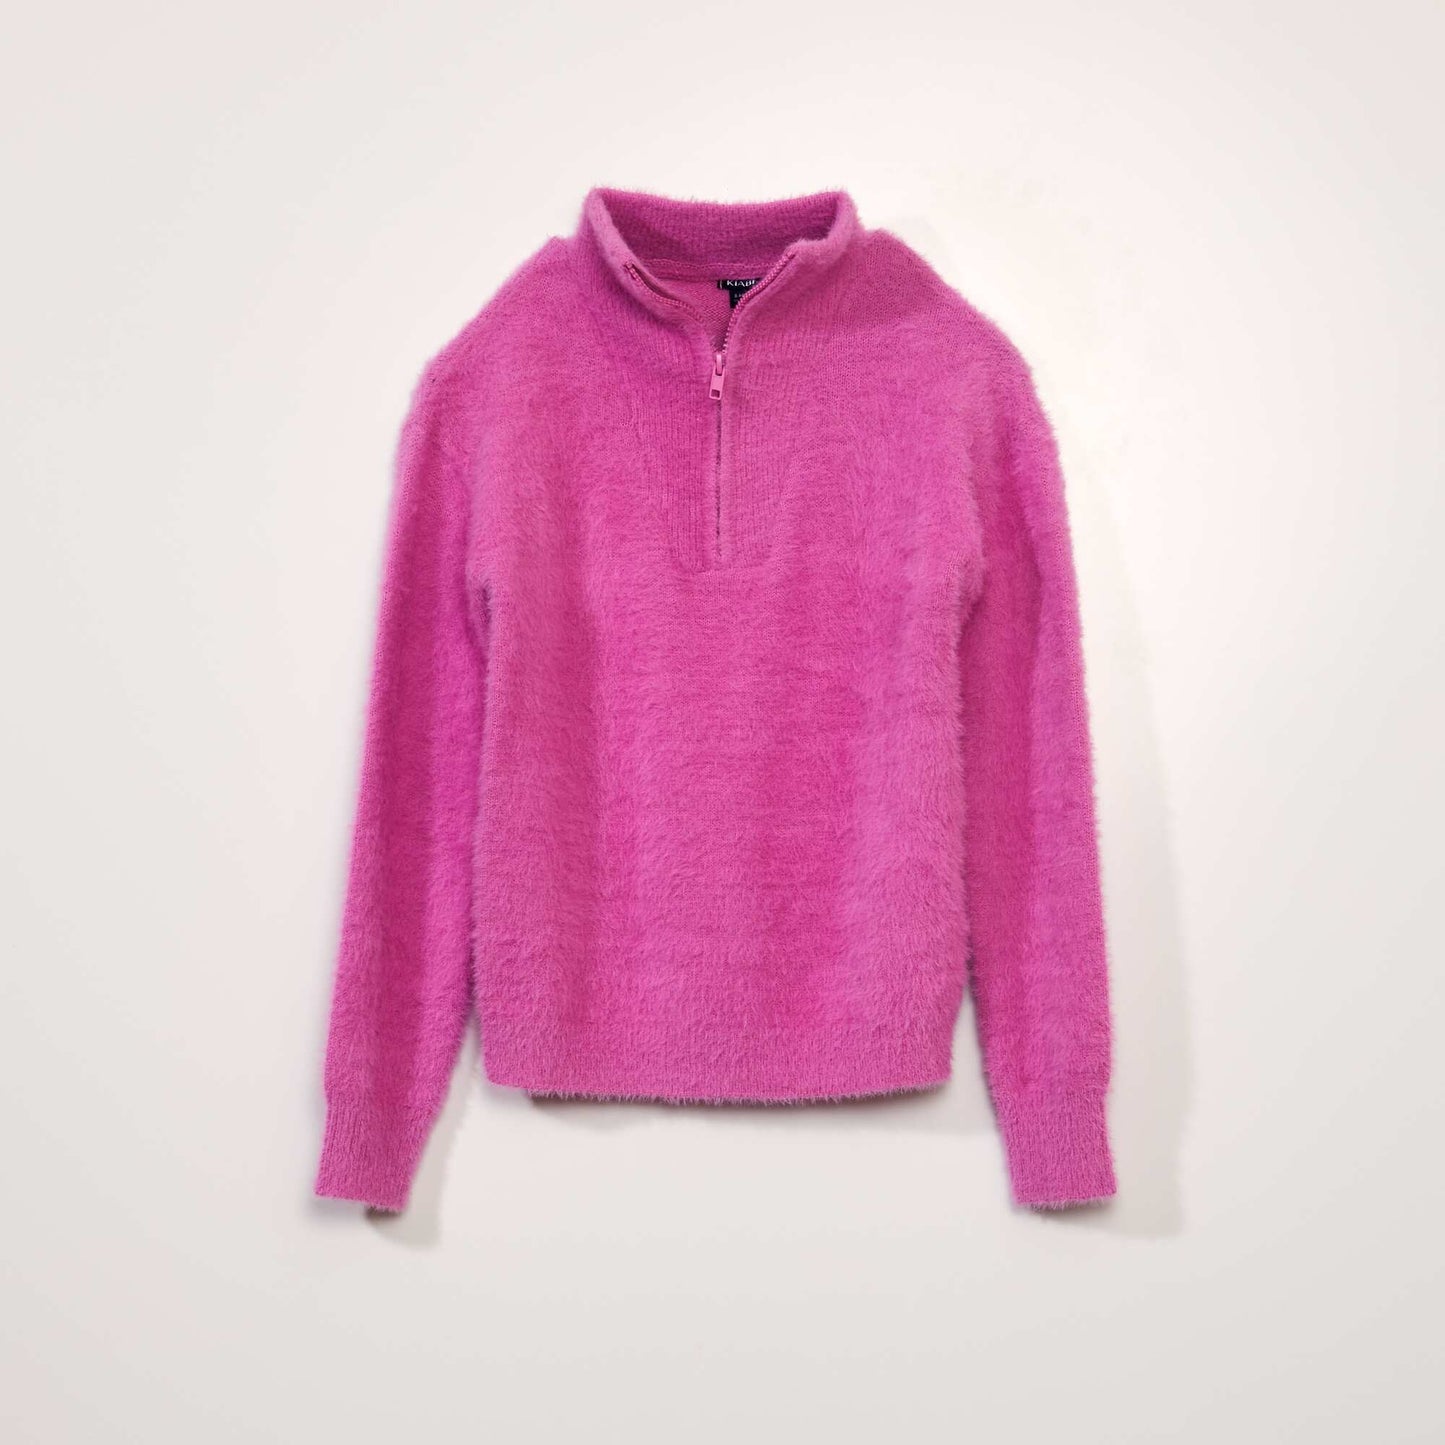 Fuzzy-knit jumper with high zipped collar SUPER PINK